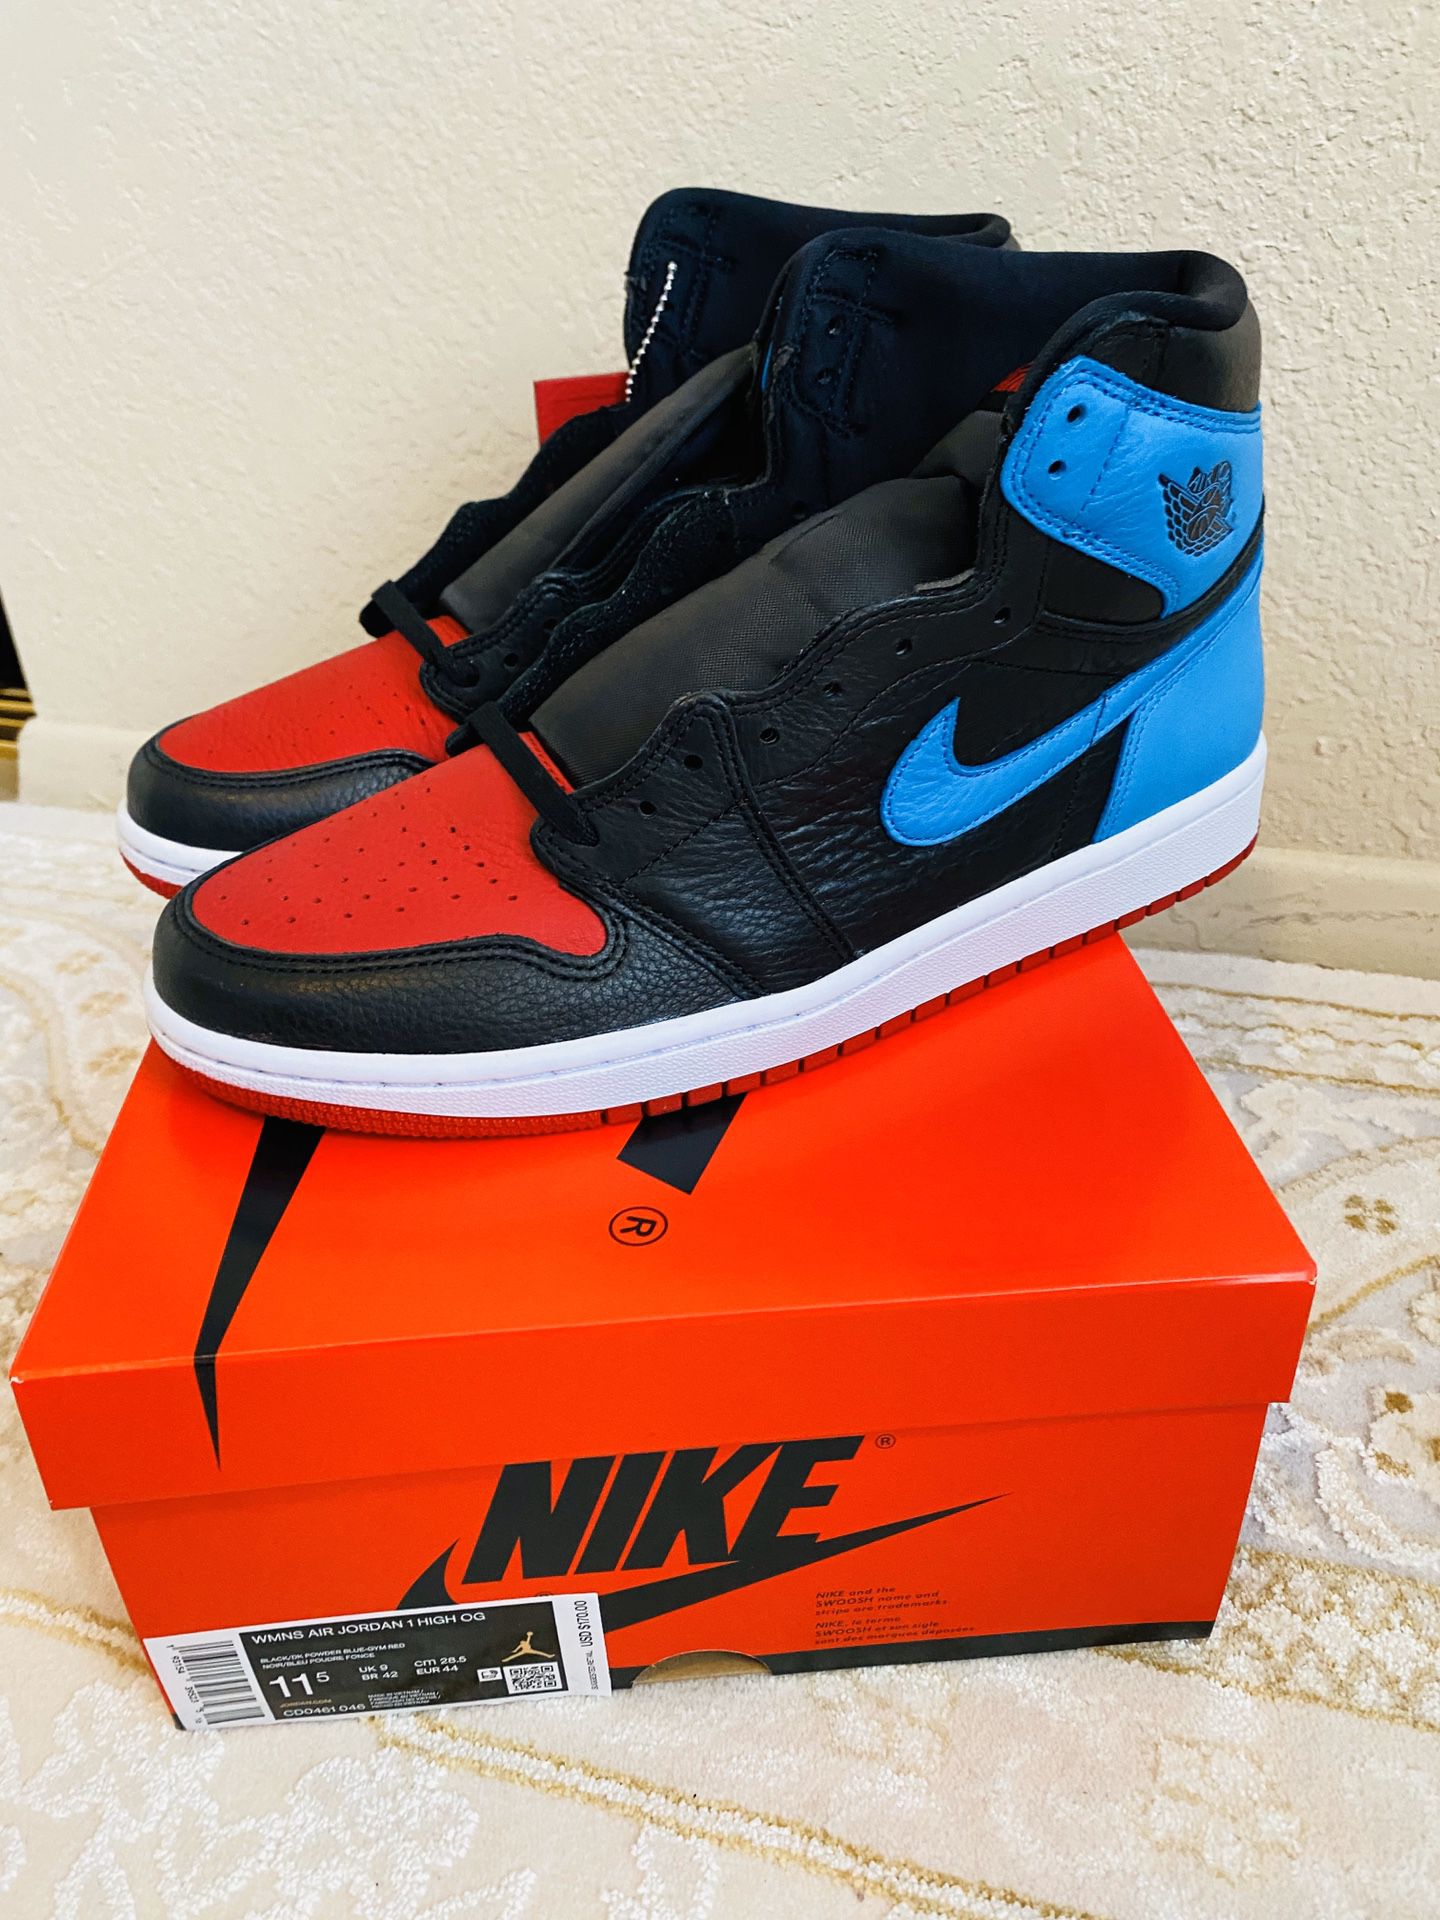 Air Jordan 1 UNC to Chicago (Size {link removed})